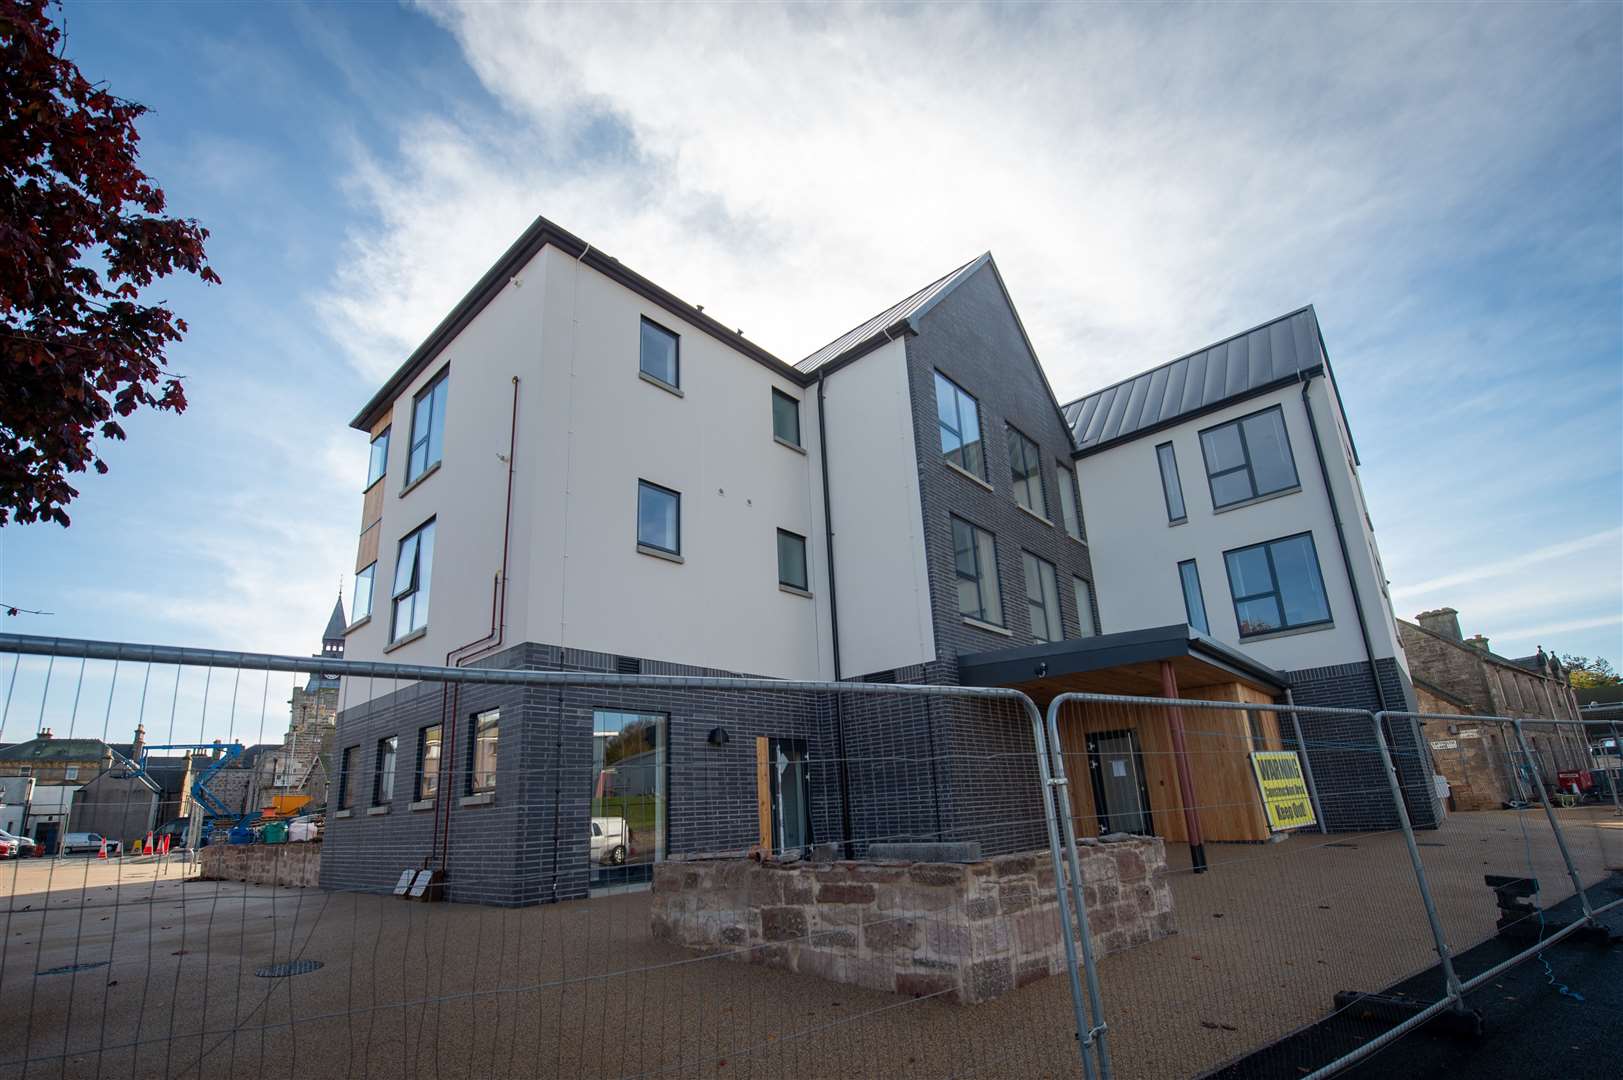 The new flats and CAB building in King Street, Nairn stand next to what was the town’s first school.